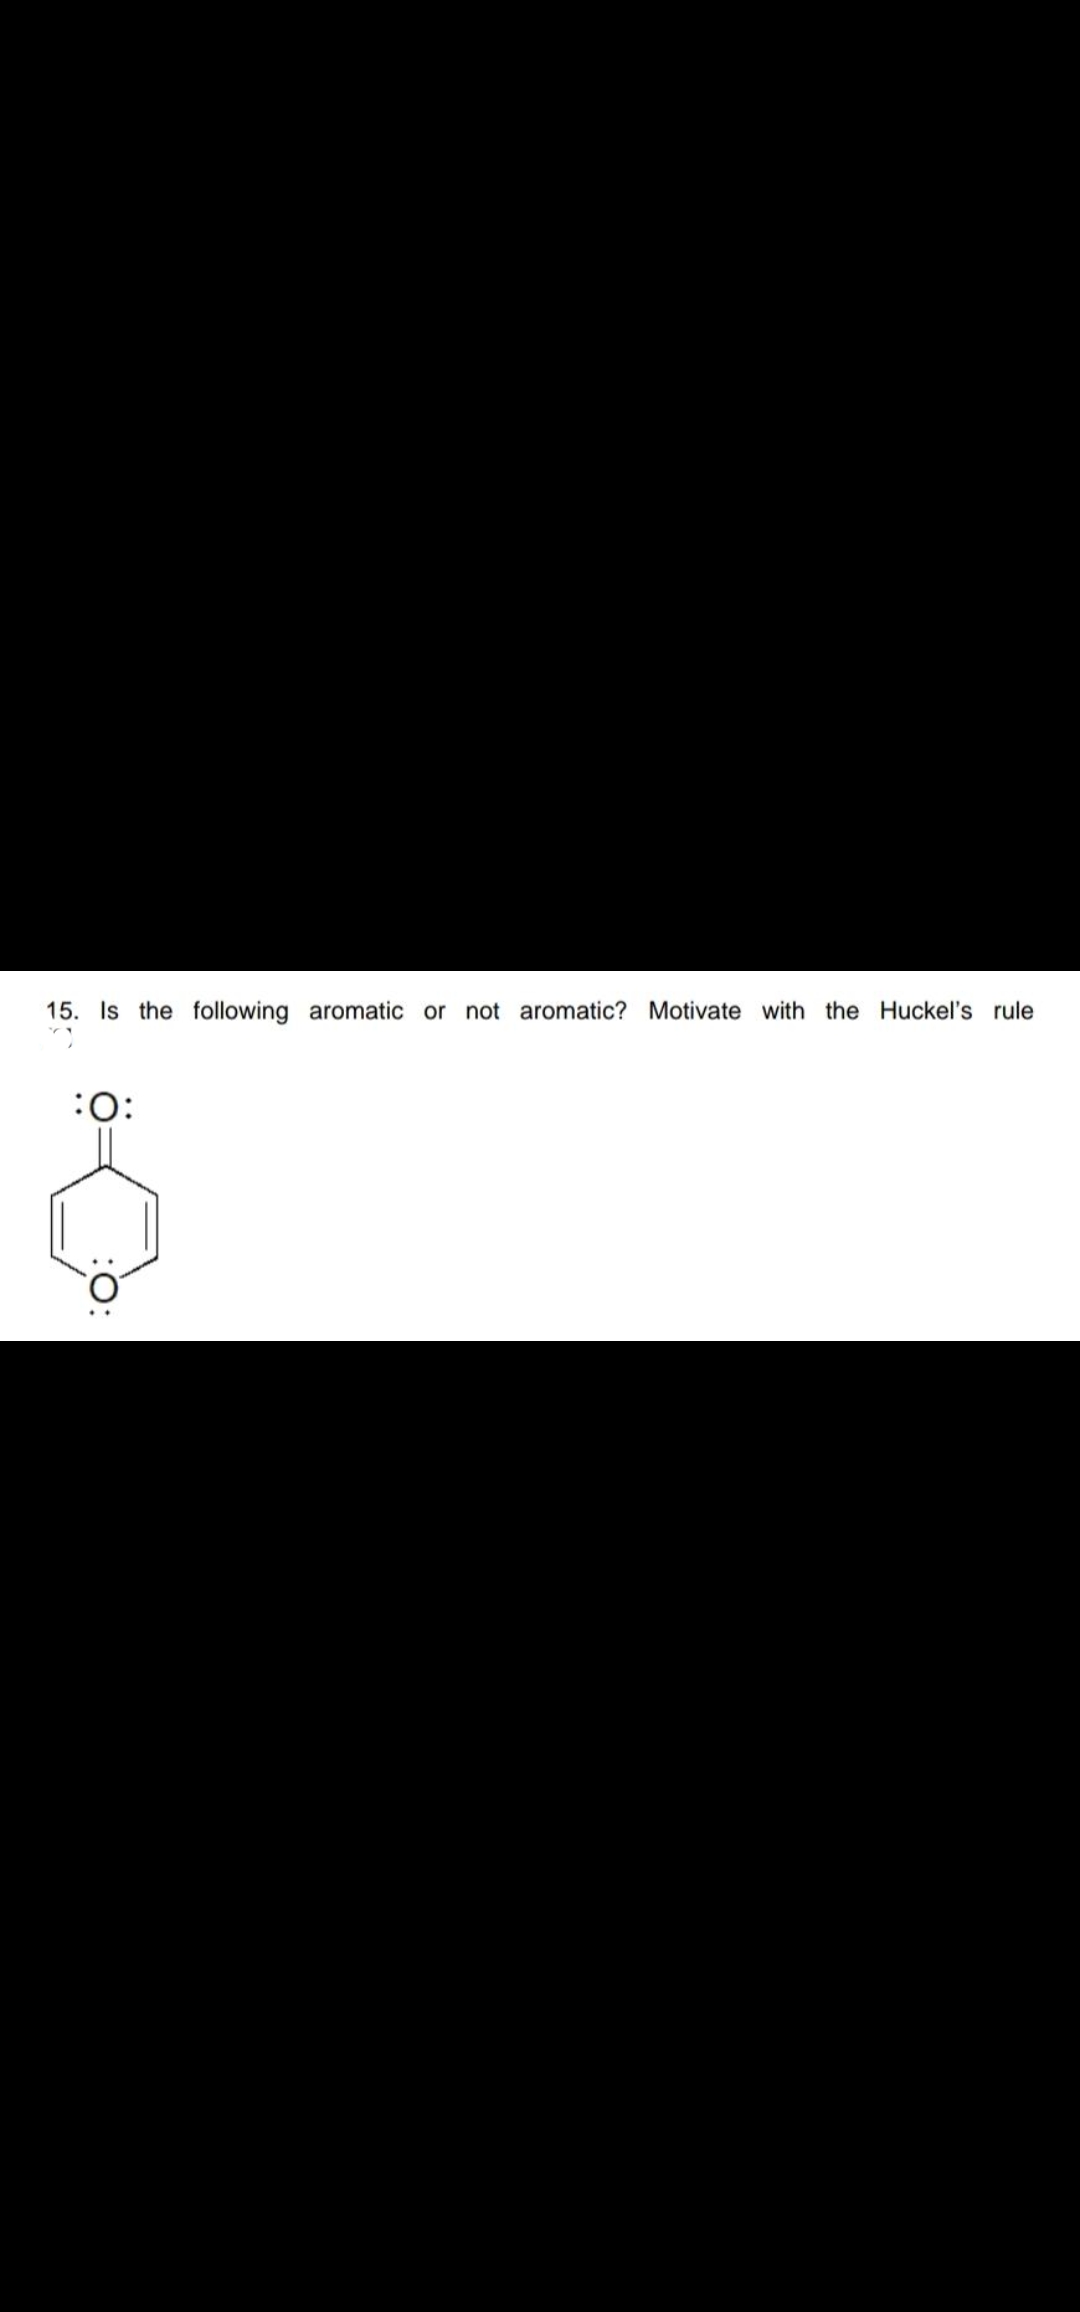 15. Is the following aromatic or not aromatic? Motivate with the Huckel's rule
:0:
